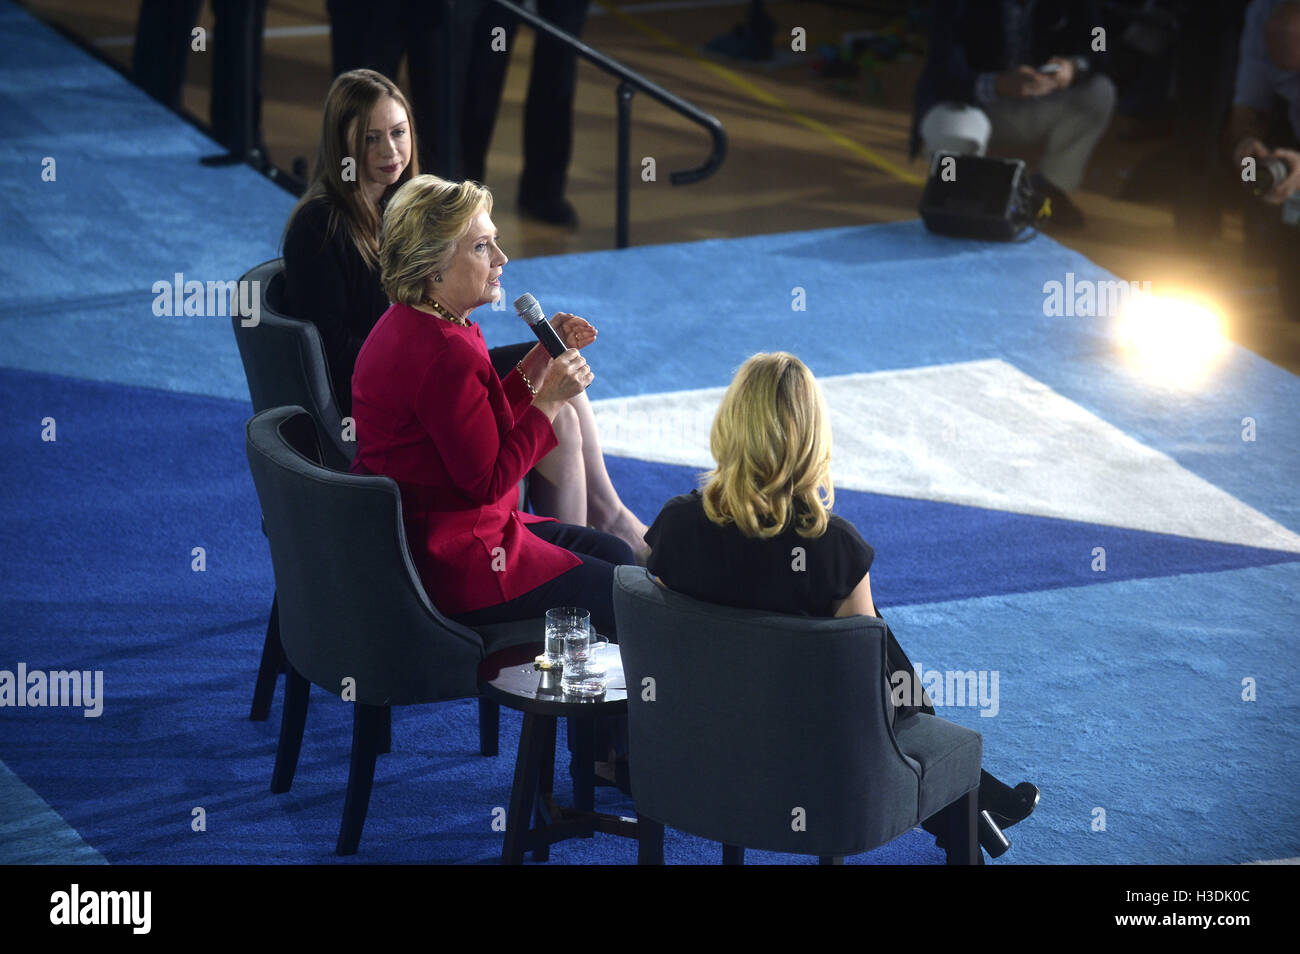 Haverford, USA. 4th Oct, 2016. Elizabeth Banks, Hillary Clinton and Chelsea Clinton hold a conversation with families about Clinton's agenda to support children and families and create an economy that works for everyone at Haverford Community Recreation & Environmental Center on October 4, 2016 in Haverford, USA. | Verwendung weltweit/picture alliance © dpa/Alamy Live News Stock Photo